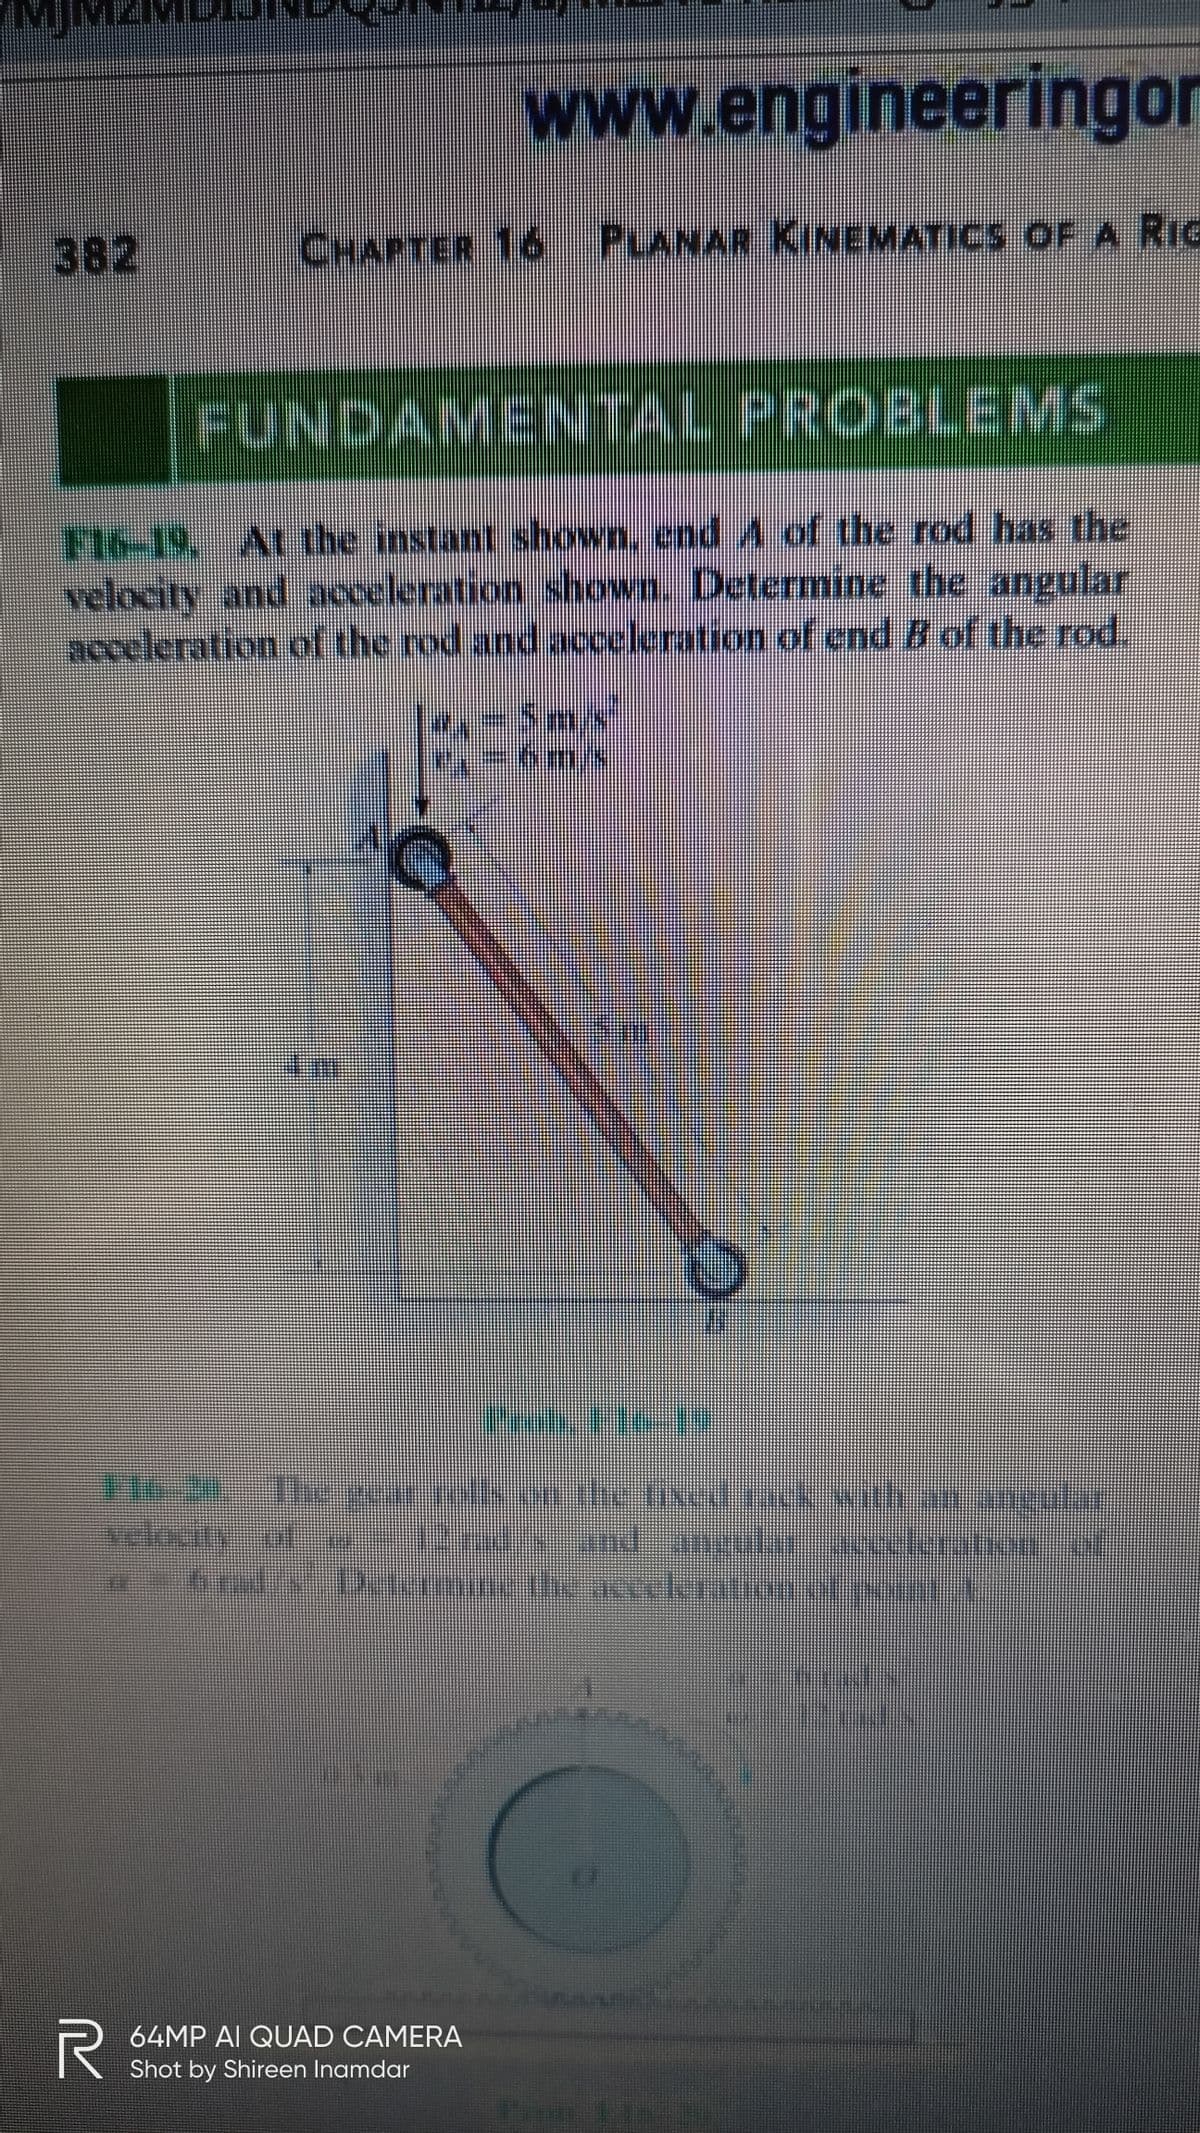 MMZMUEN
www.engineeringor
382
CHAPTER 16 PLANAR KINEMATICS OF A RIG
FUNDAMENTAL PROBLEMS
F16-19, Atthe instant shown, end A of the rod has the
velocity and acceleration shown. Determine the angular
acceleration of the rod and acceleration of end B of the rod.
=5mx
T16-241 ecar rolls orn the fixed ack with an ancular
velocity ot ial and anguta acceleration of
64MP AI QUAD CAMERA
Shot by Shireen Inamdar
